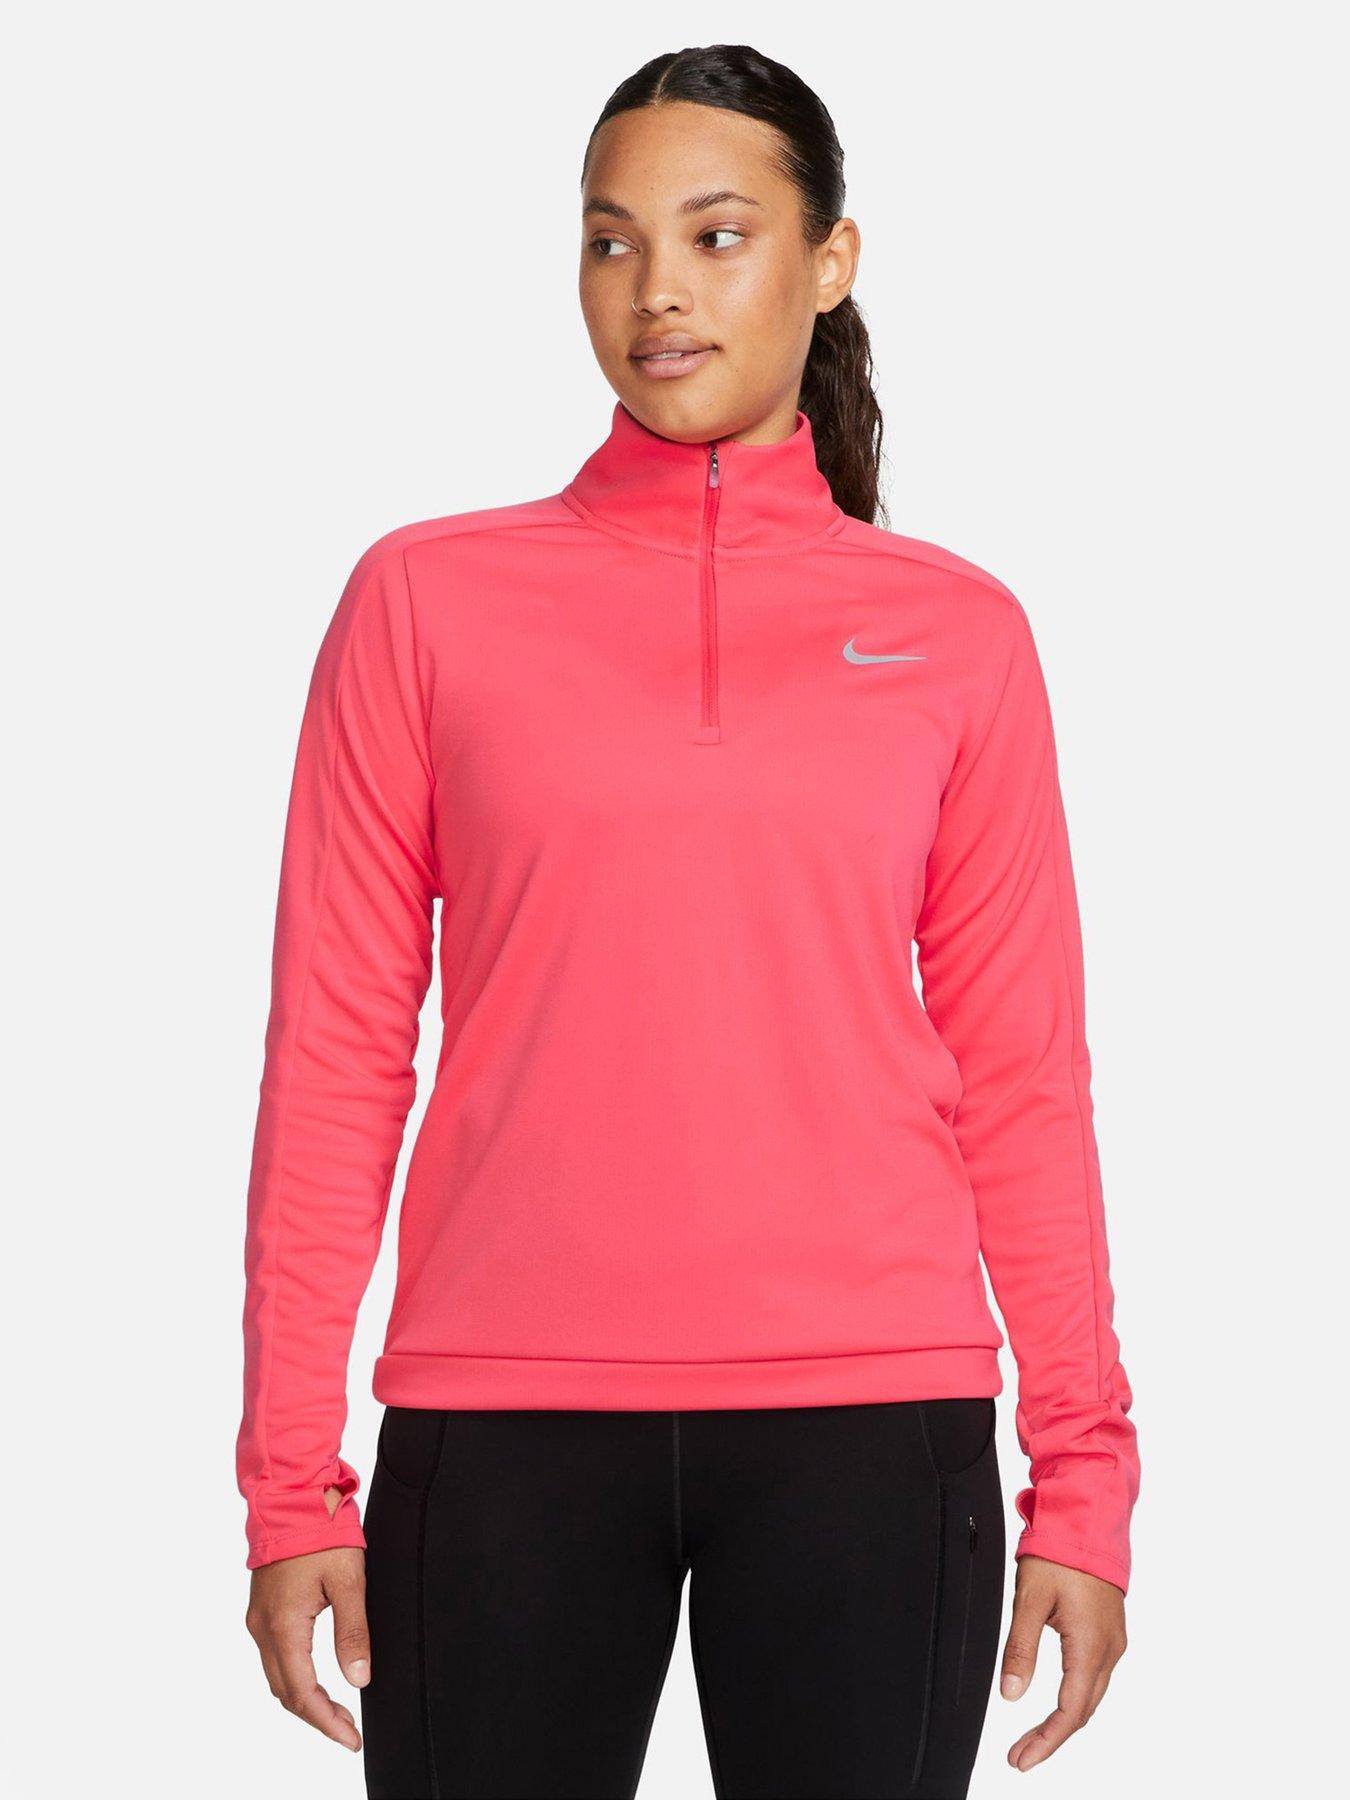 Nike Dri-FIT Pacer Women's 1/4-Zip Pullover Top - Blue